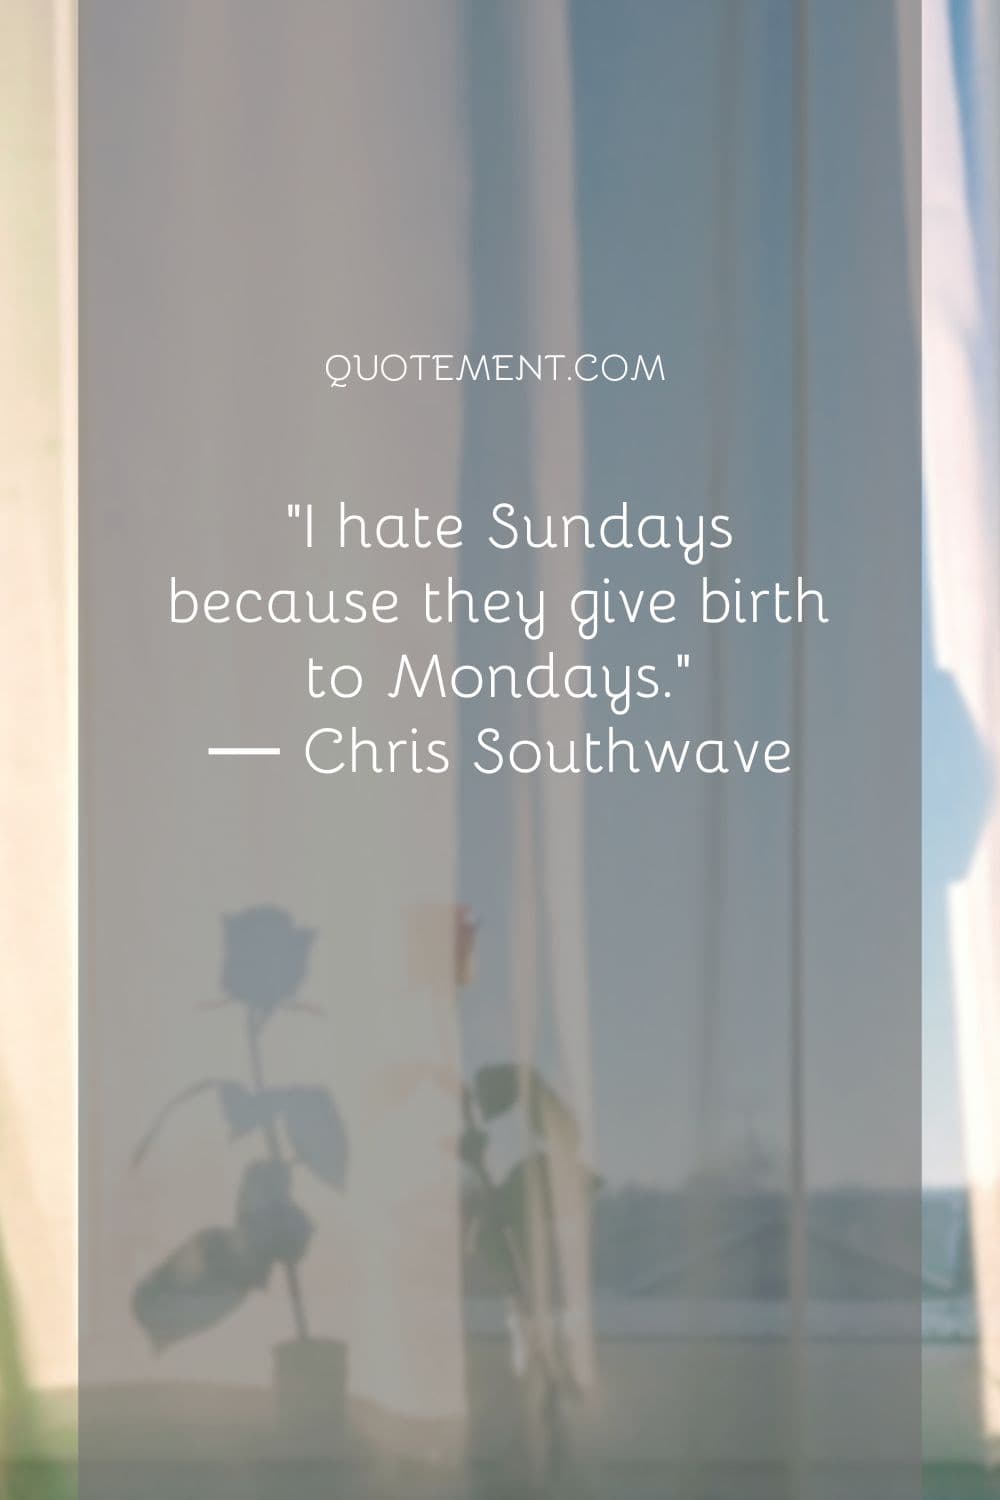 I hate Sundays because they give birth to Mondays